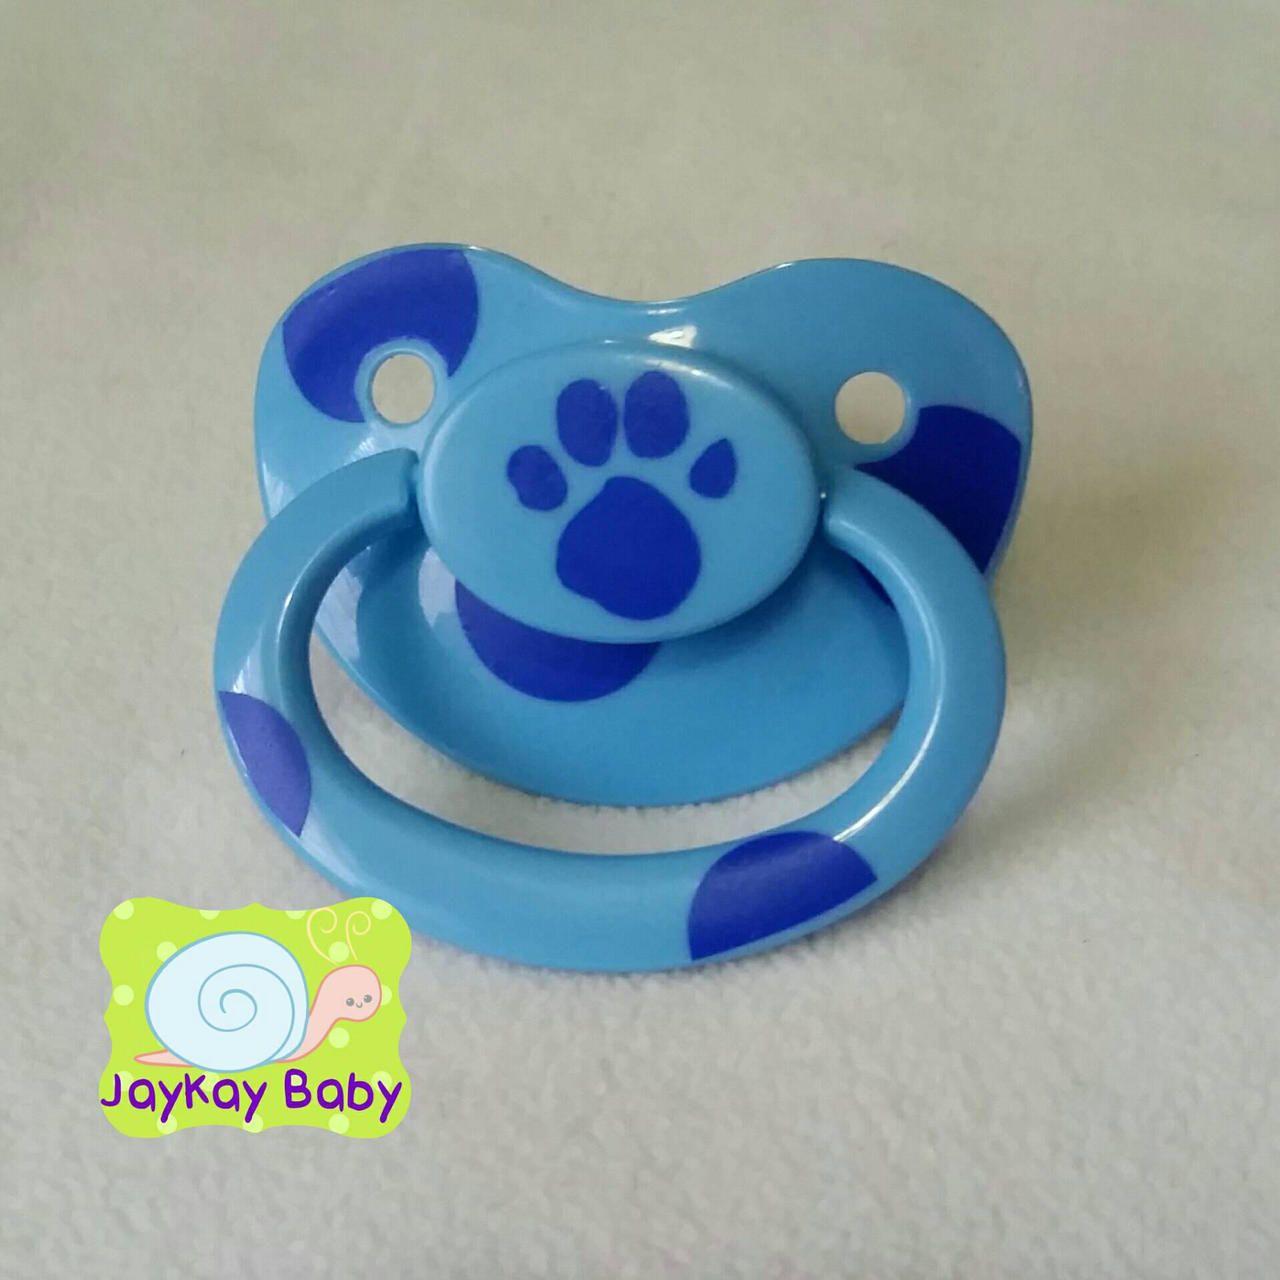 Blue Clue Print Paw Logo - Blue's Clues Paw Print Themed Adult Pacifier - Jaykaybaby